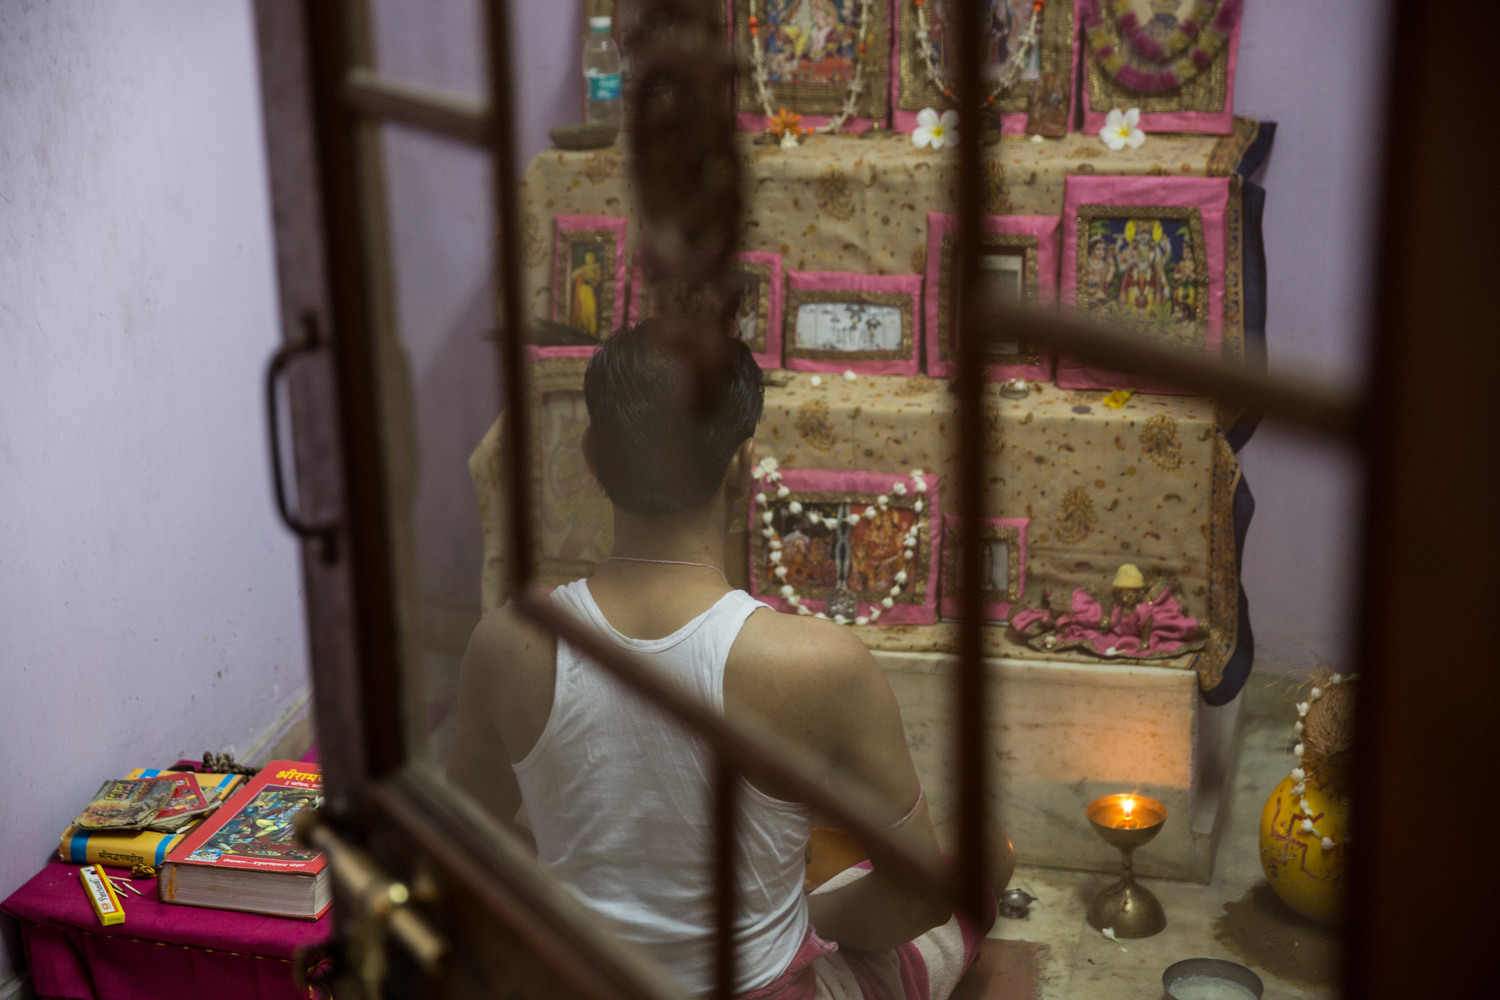  A Hindu man prays in his home temple. Each Hindu family has a private temple in their home, ranging from a small shelf to an elaborate prayer room. 